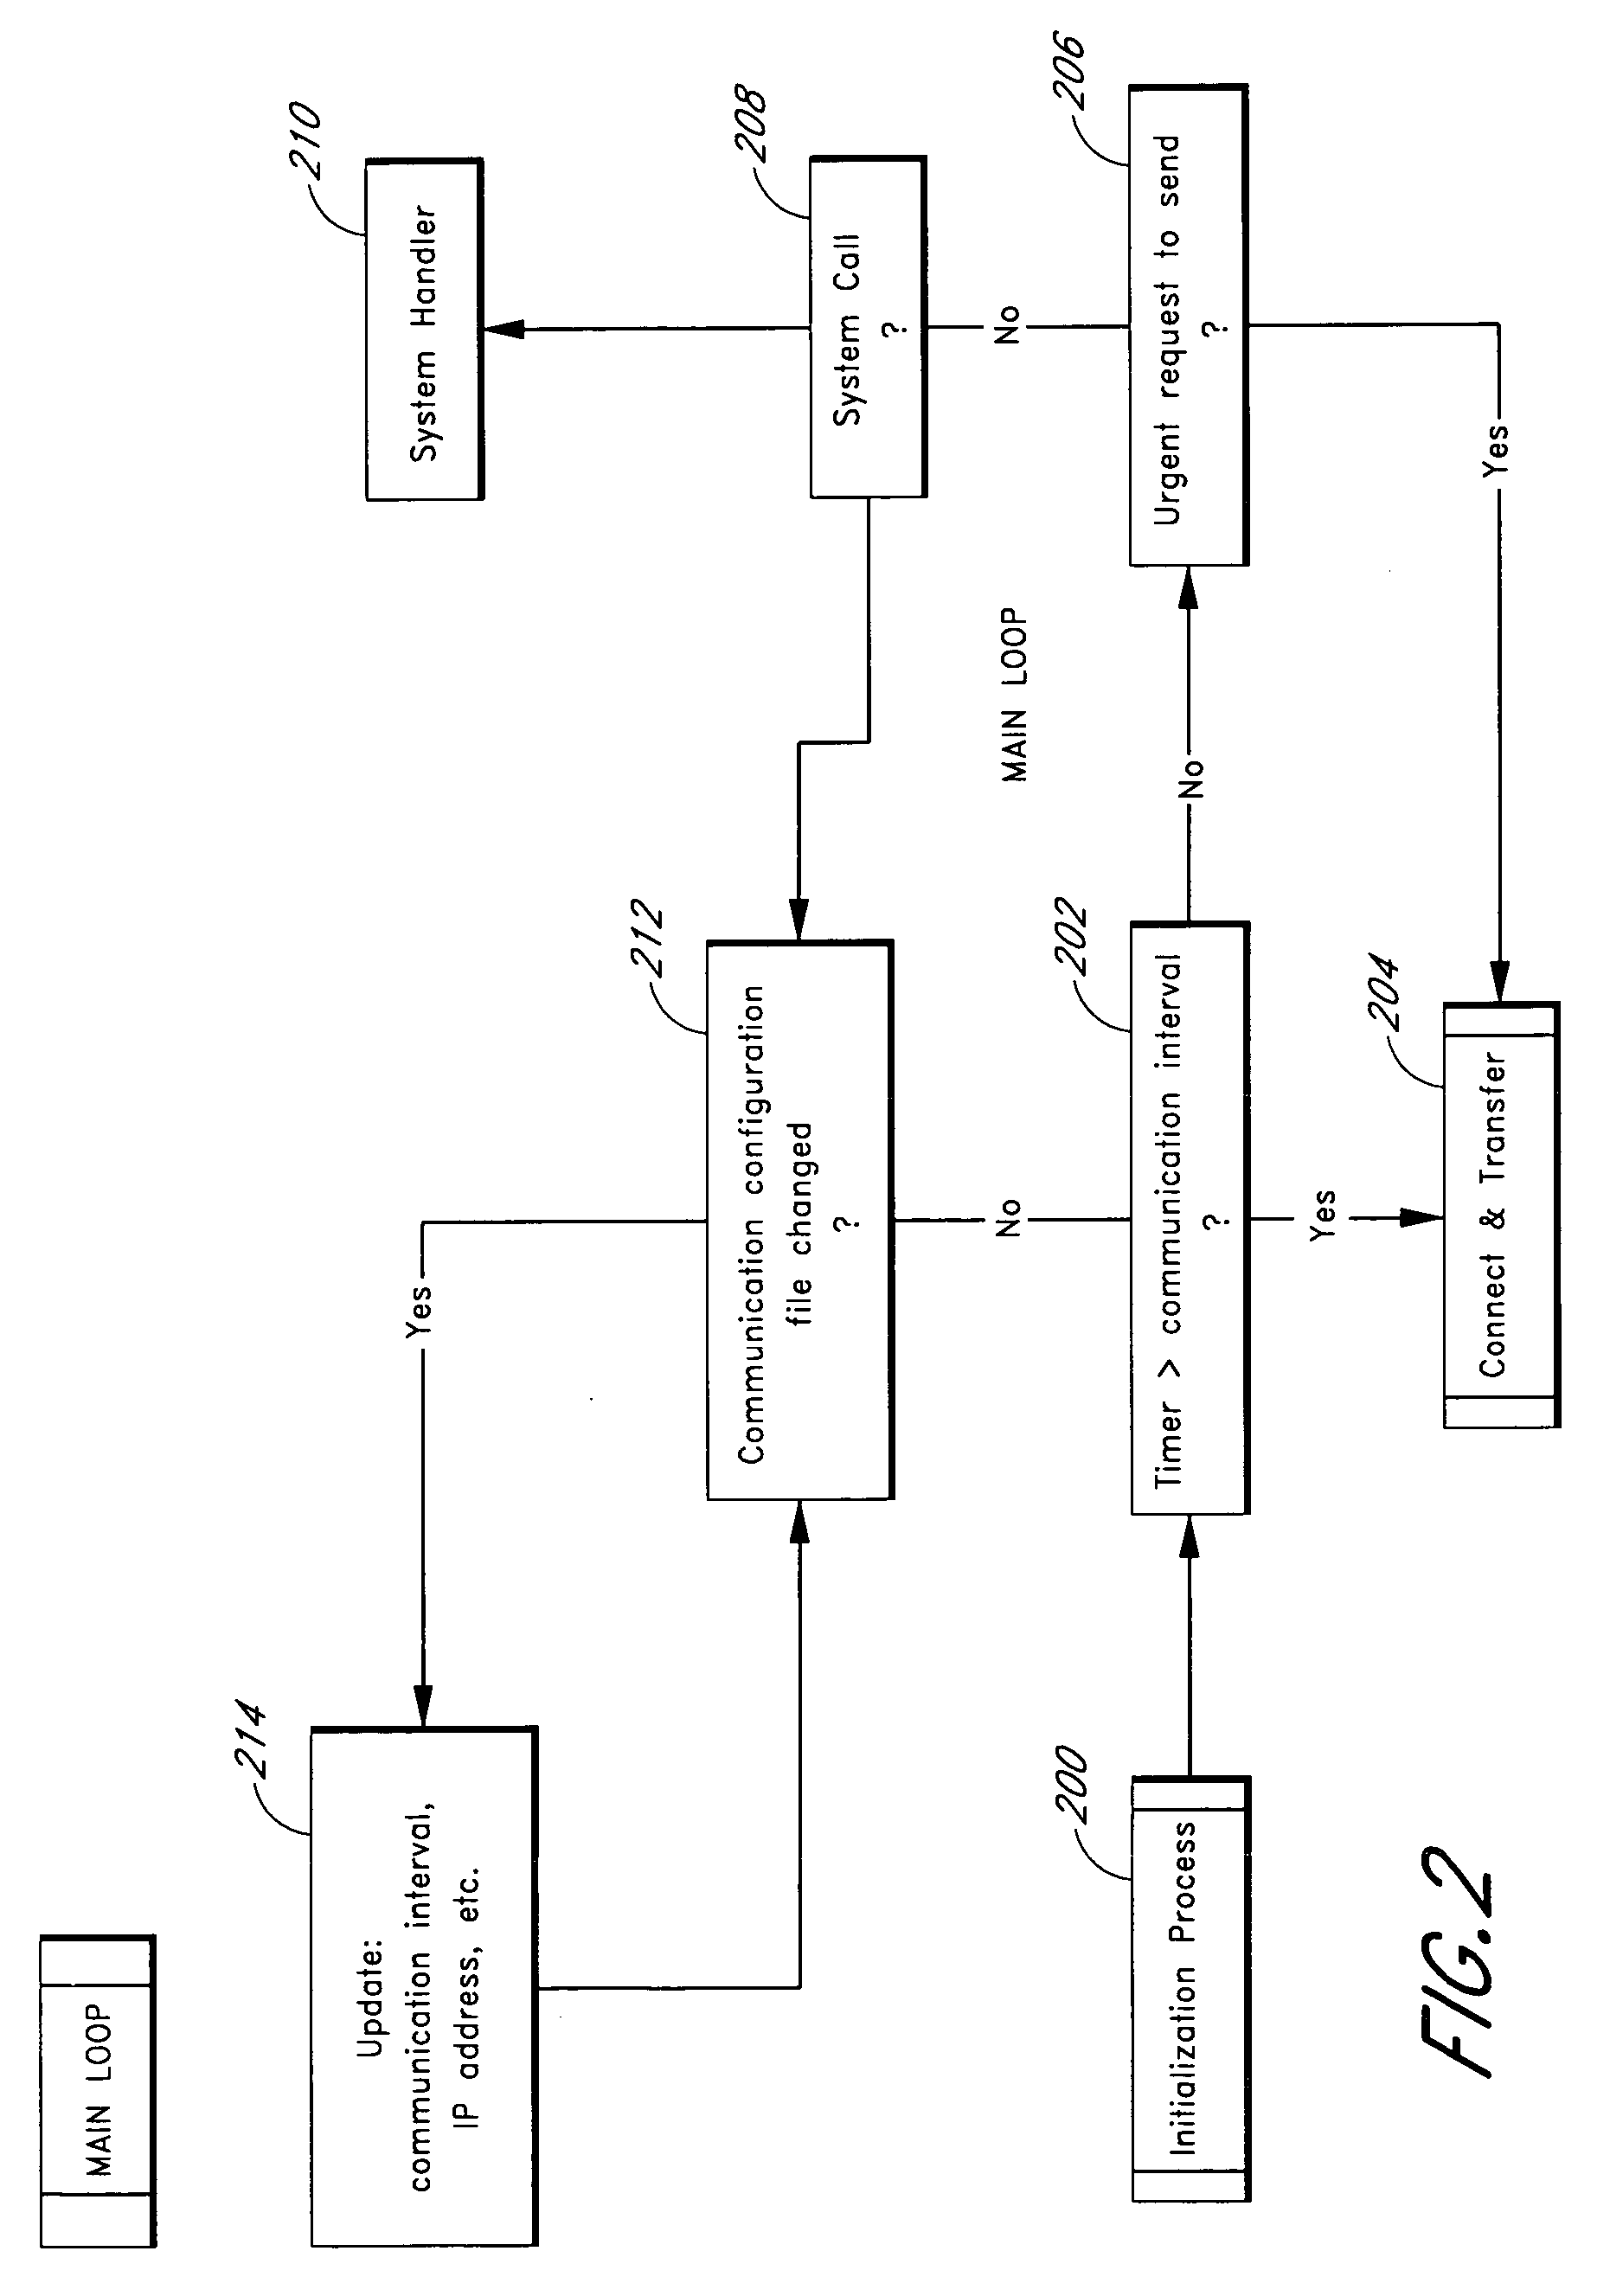 Method and system of communication for automated inventory systems